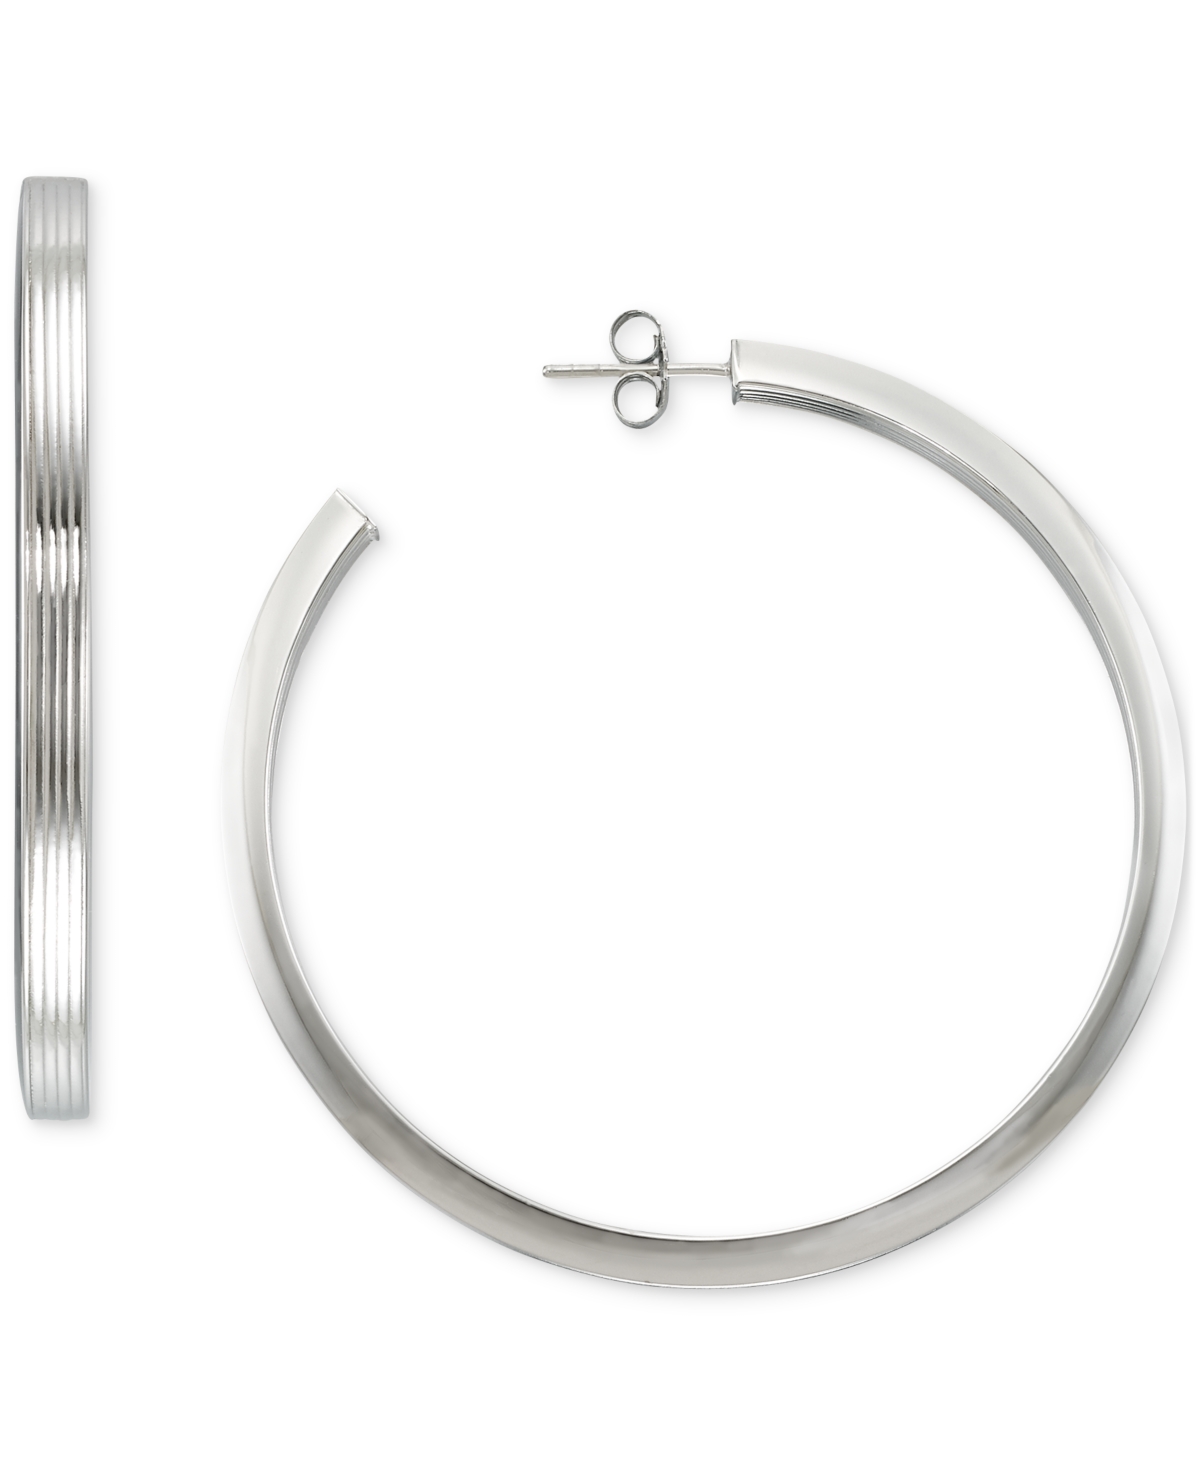 Macy's Textured C-hoop Earrings In 14k Gold Vermeil Over Sterling Silver, 2-1/4" (also In Sterling Silver)